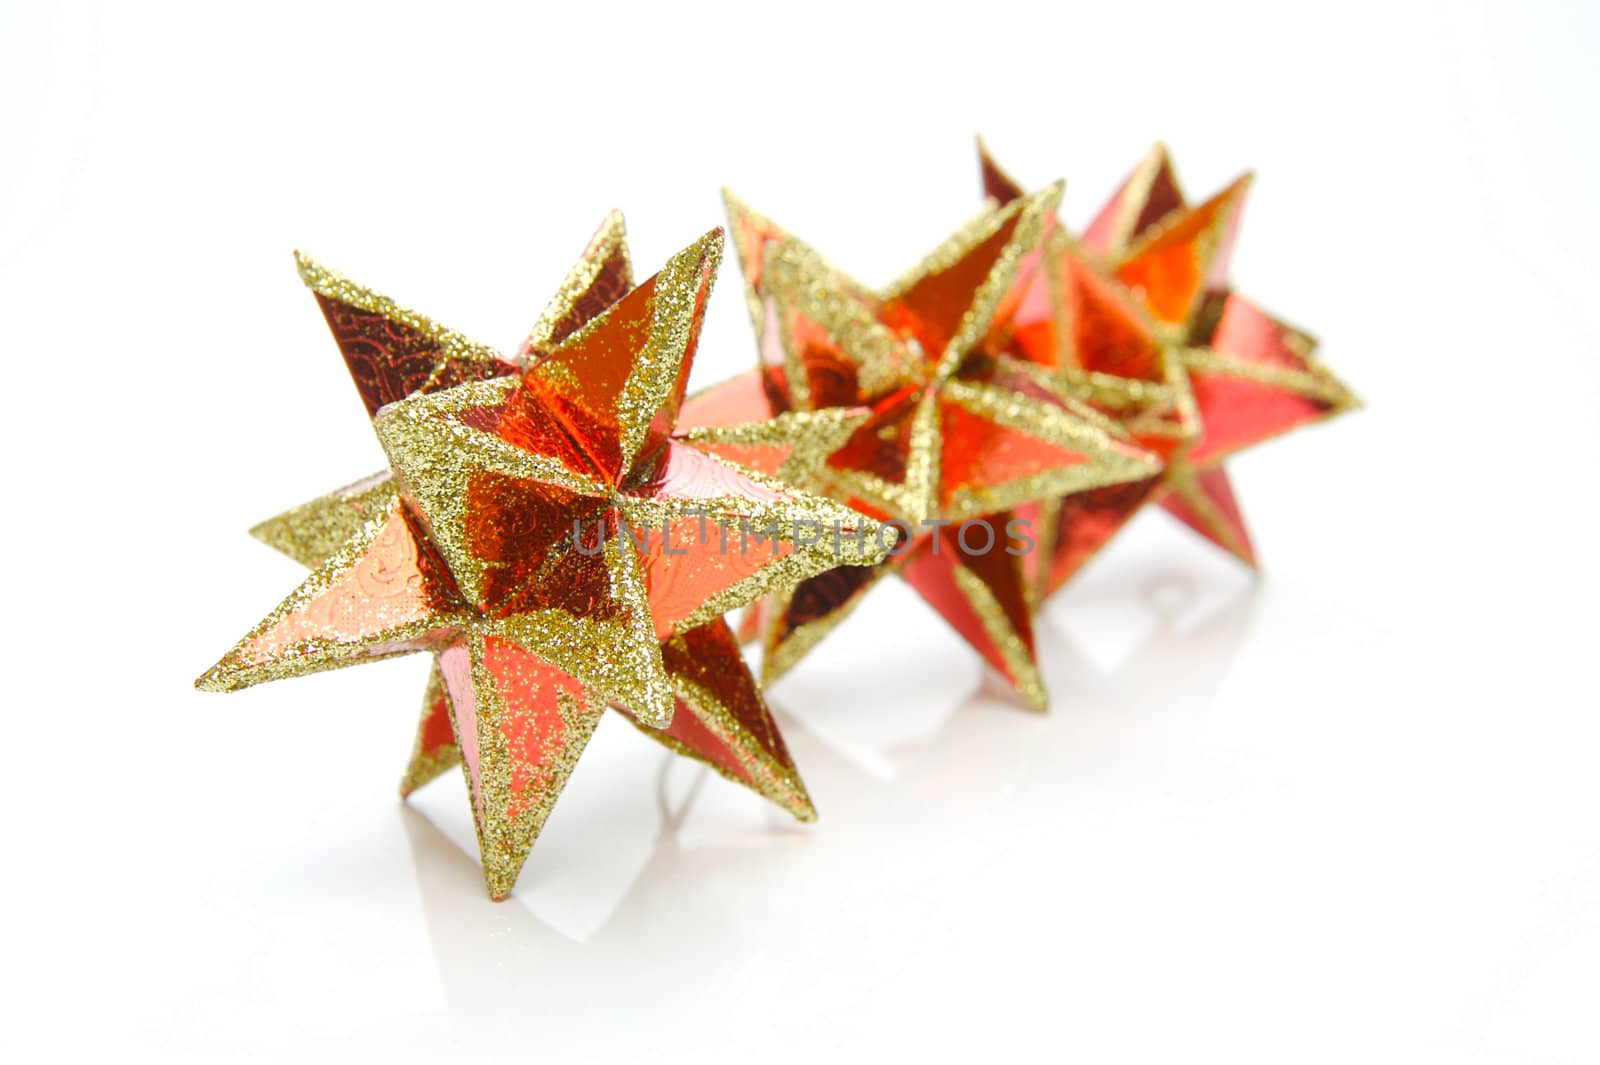 Christmas stars isolated against a white background